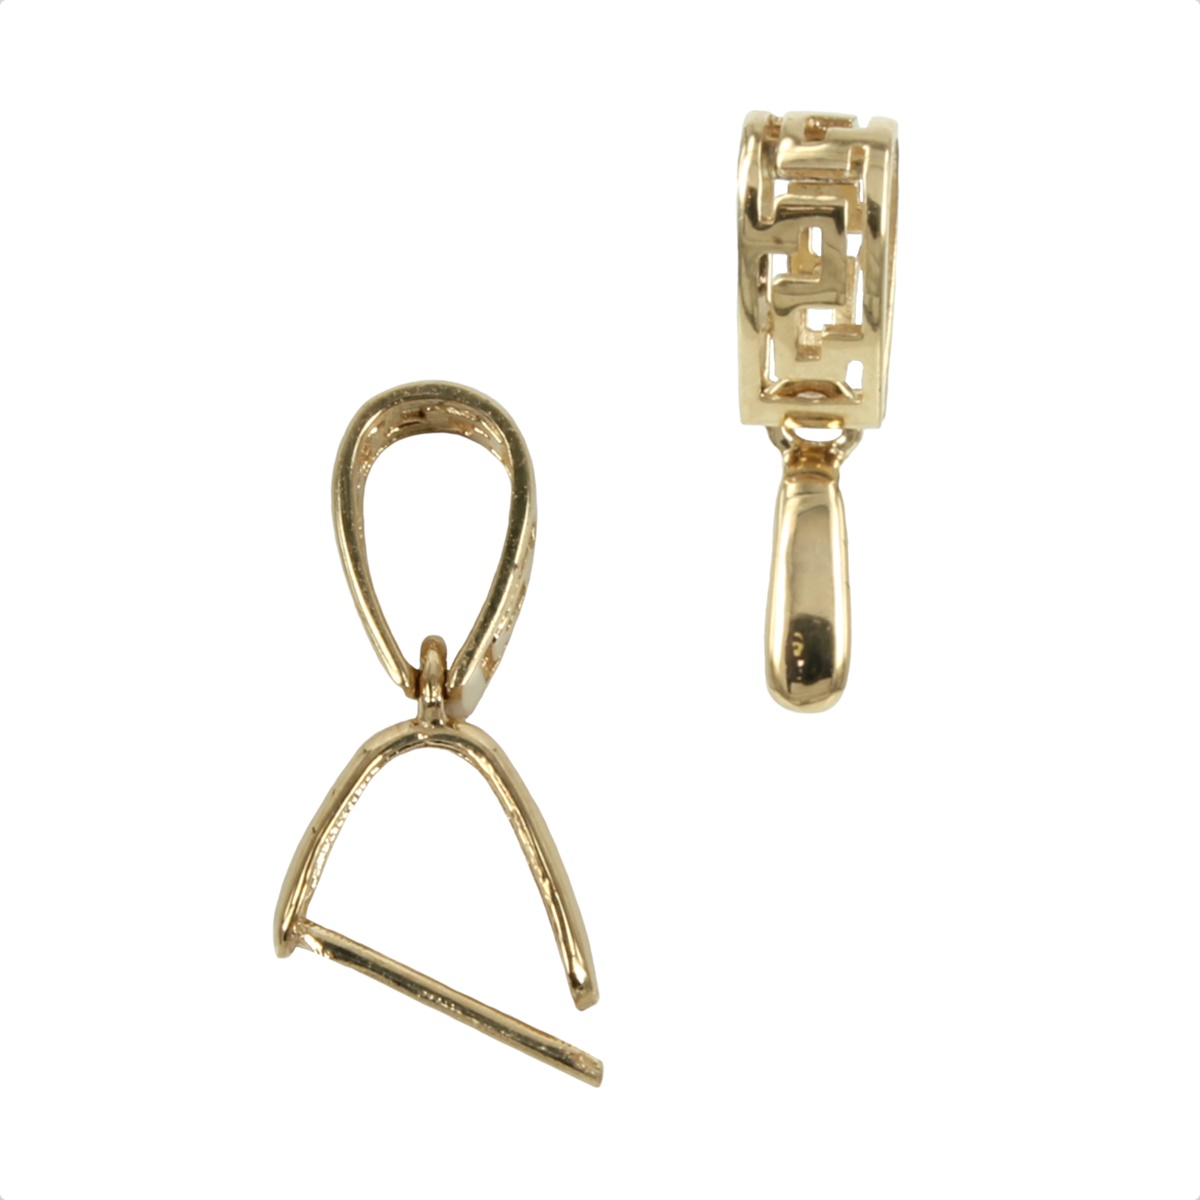 18Kt Gold Teardrop Pinch Bail with Meandros Patterned Bail 11.6×6.4mm Yellow Gold